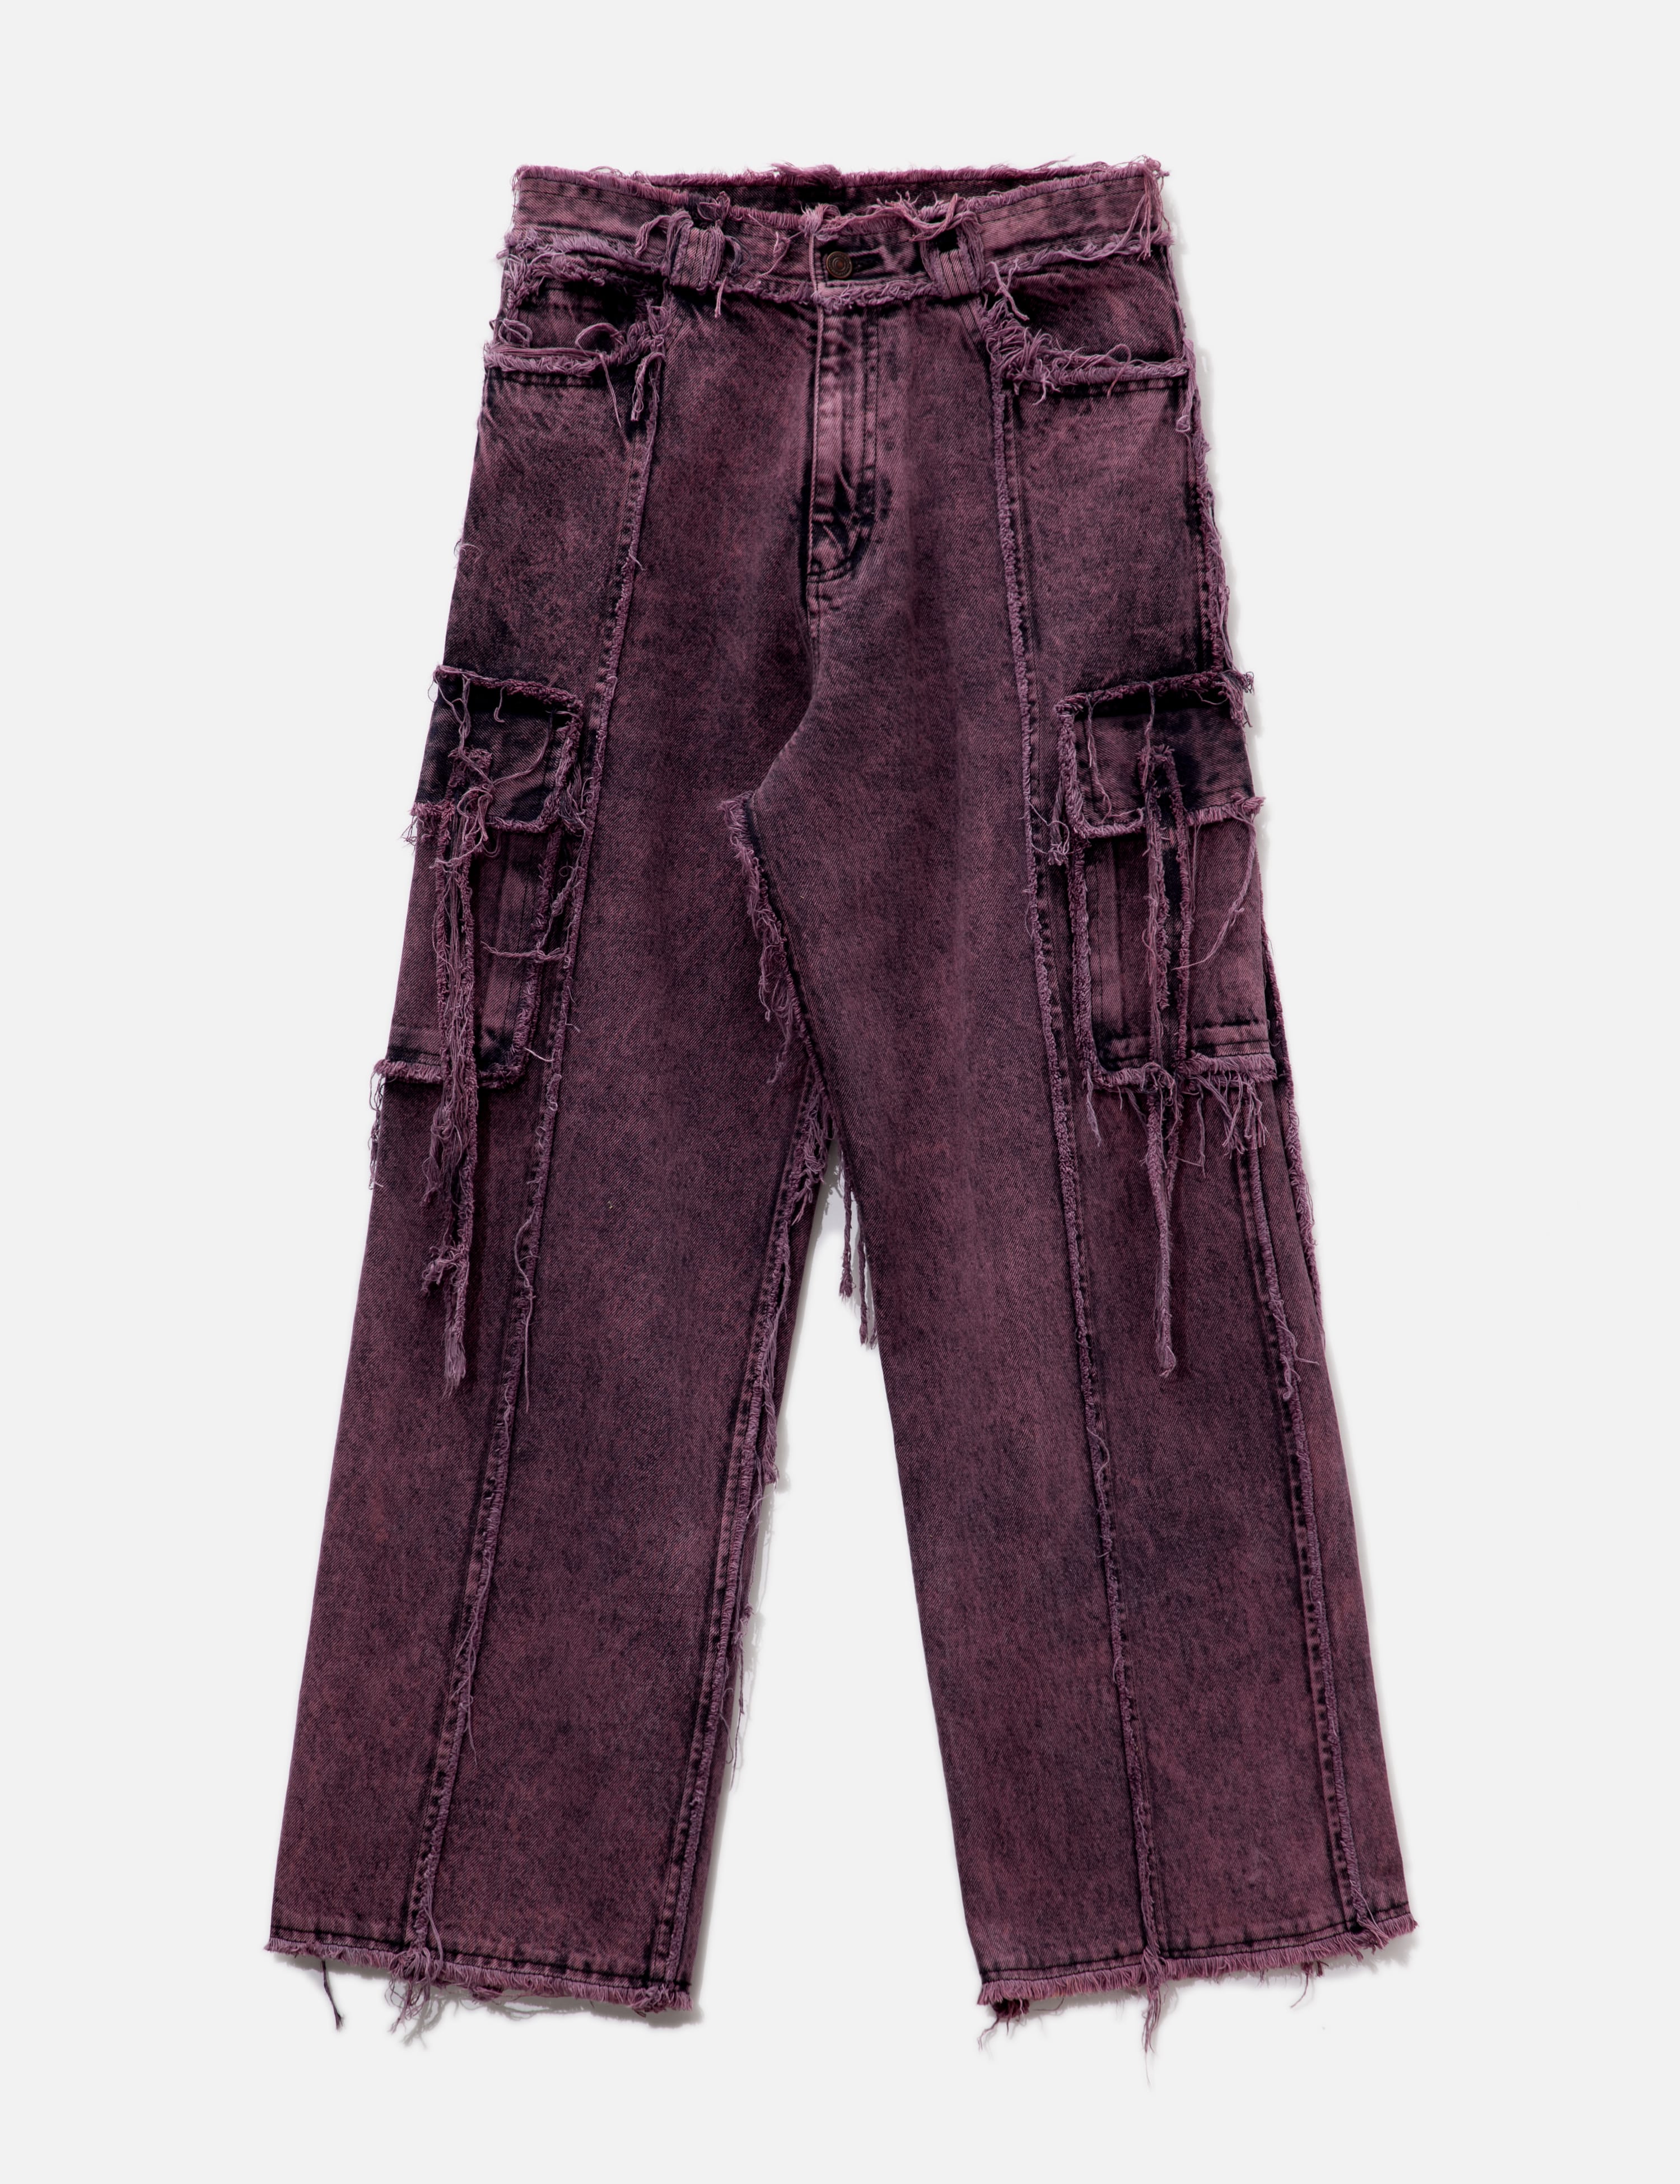 Stüssy - Overdyed Big Ol' Jeans | HBX - Globally Curated Fashion